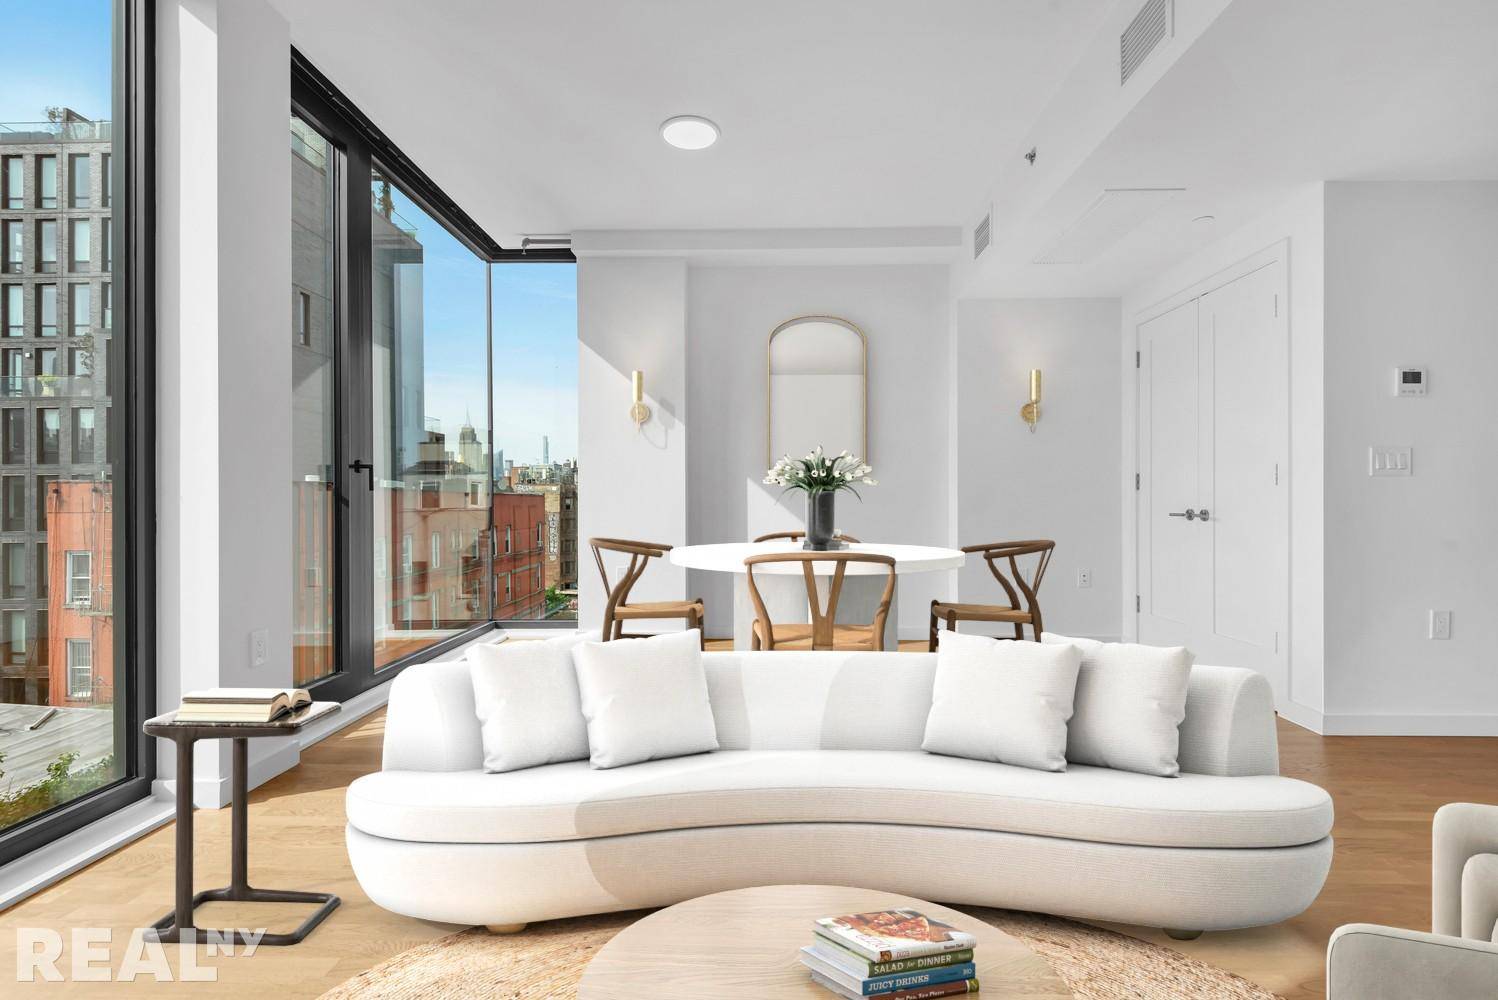 14 Clinton is a newly constructed boutique condominium nestled in the heart of the Lower East Side featuring an exclusive collection of only six units, with a striking communal roof ...